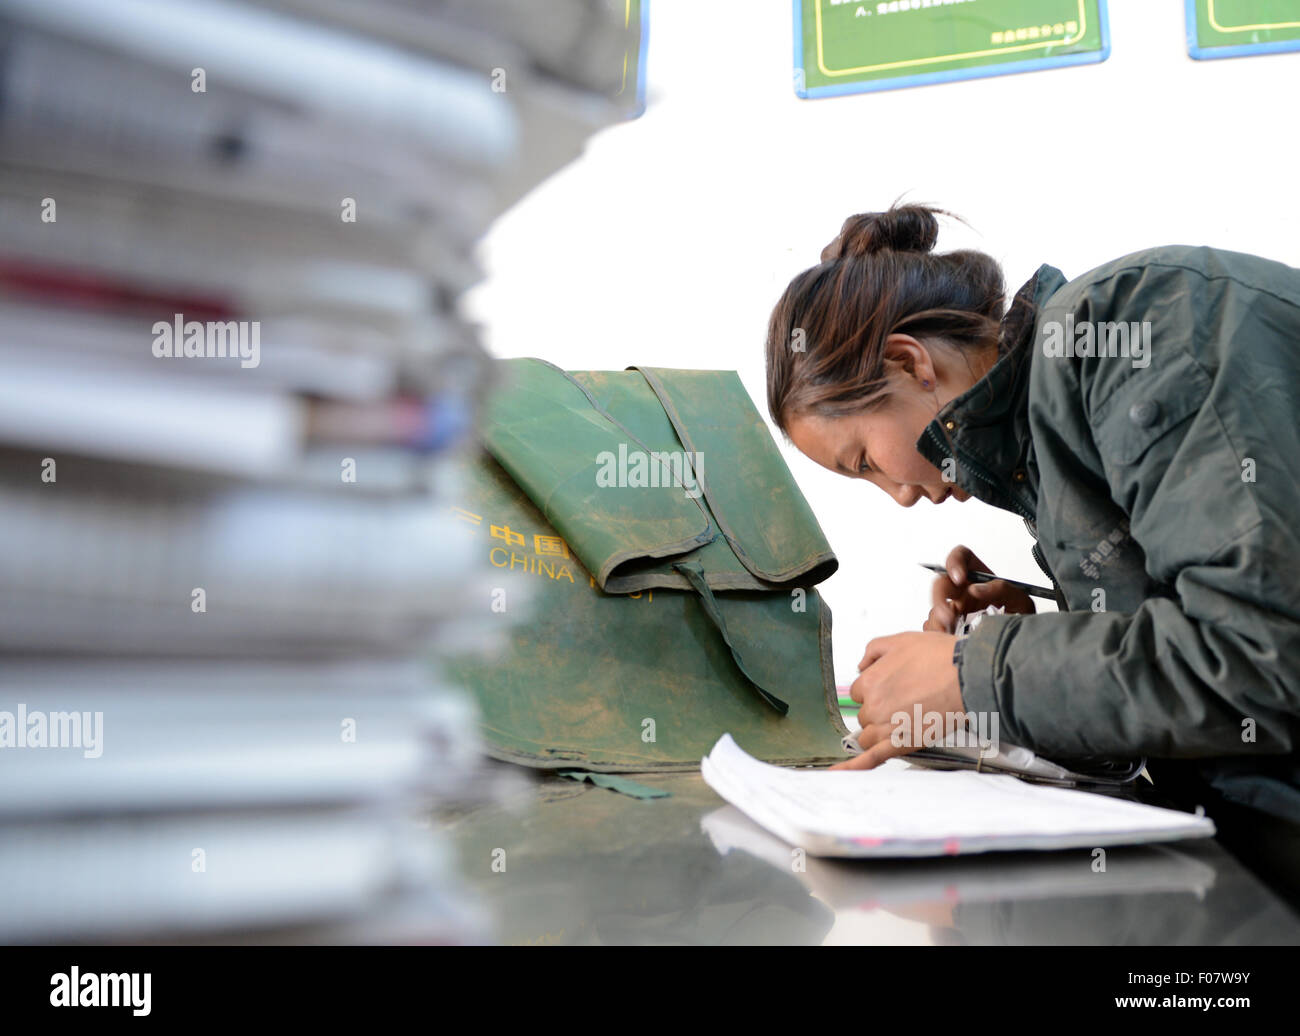 (150810) -- NYIMA, Aug. 10, 2015 (Xinhua) -- Mailwoman Bamu registers newspapers and magazines in Nyima County of Nagqu Prefecture, southwest China's Tibet Autonomous Region, June 10, 2015. Bamu, a 26-year-old woman of Tibetan ethnic group, has been working as a mailwoman since 2006 for seven remote villages in Nyima County, which stands at an average of 4,500 meters above sea level and covers over 150 thousand square kilometers but has a population of less than 30 thousand. The farthest village is more than 100 kilometers away from the county town, and even some door-to-door distan Stock Photo